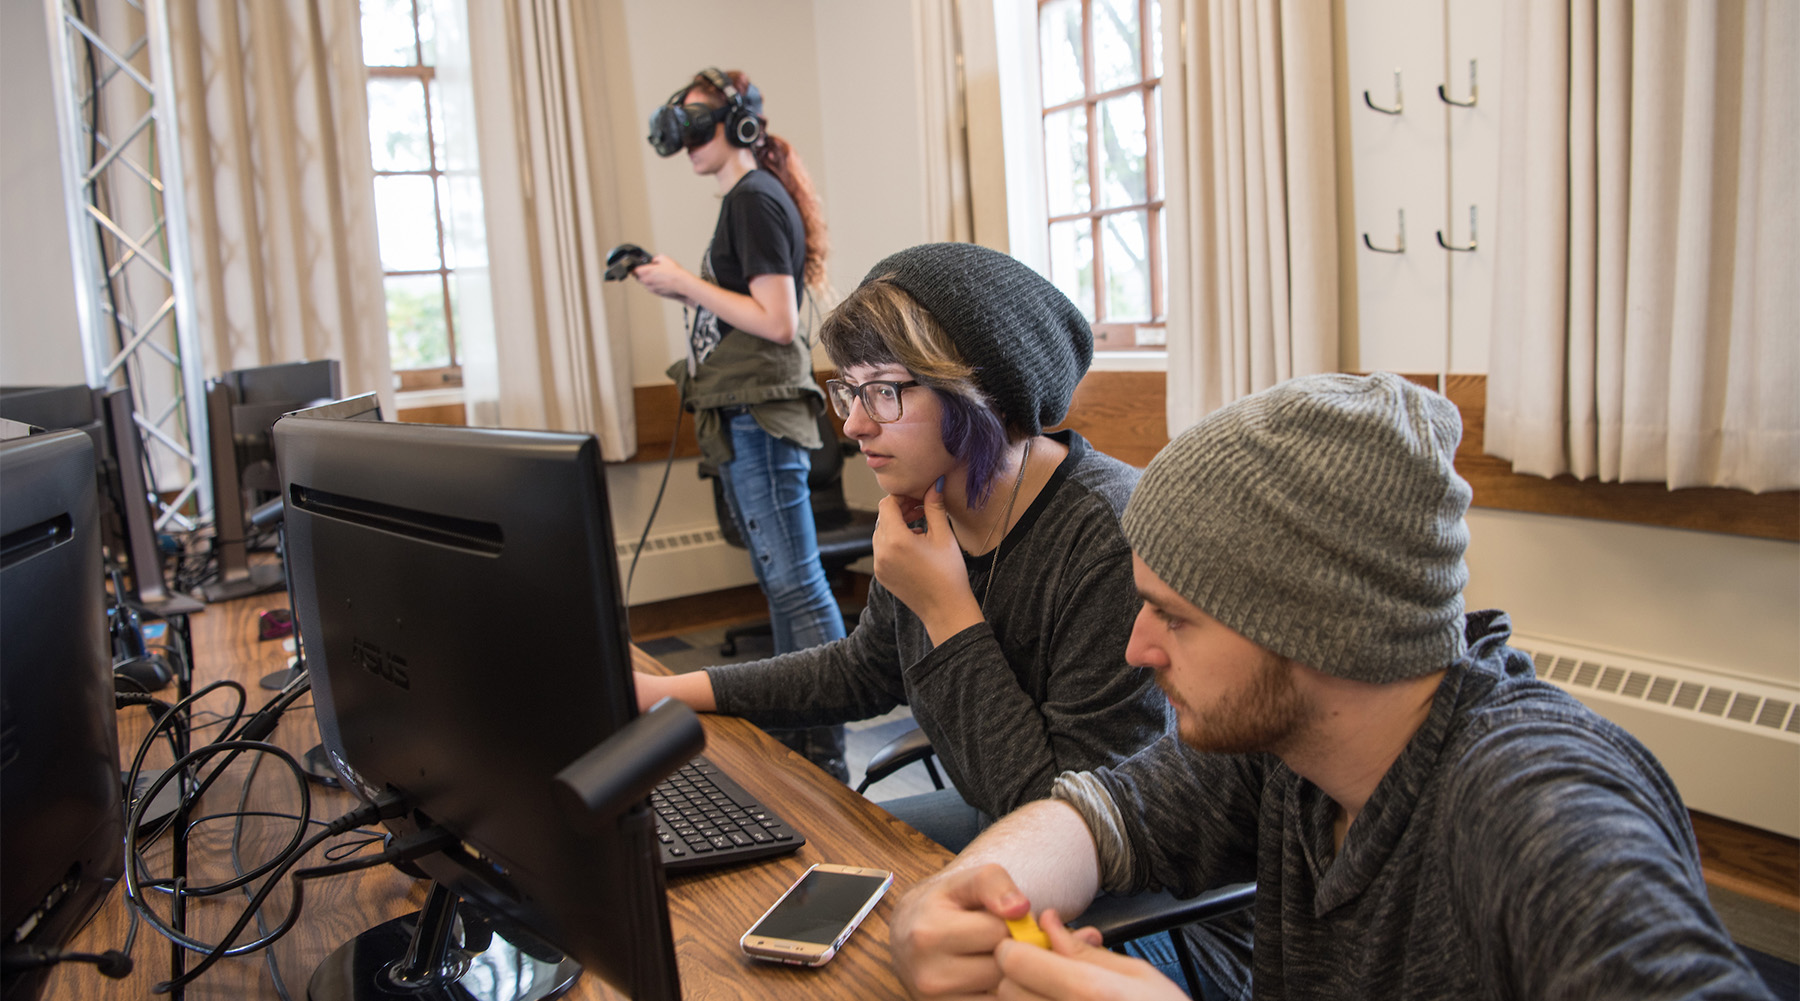 Two students work at a computer while another tests out VR equipment.